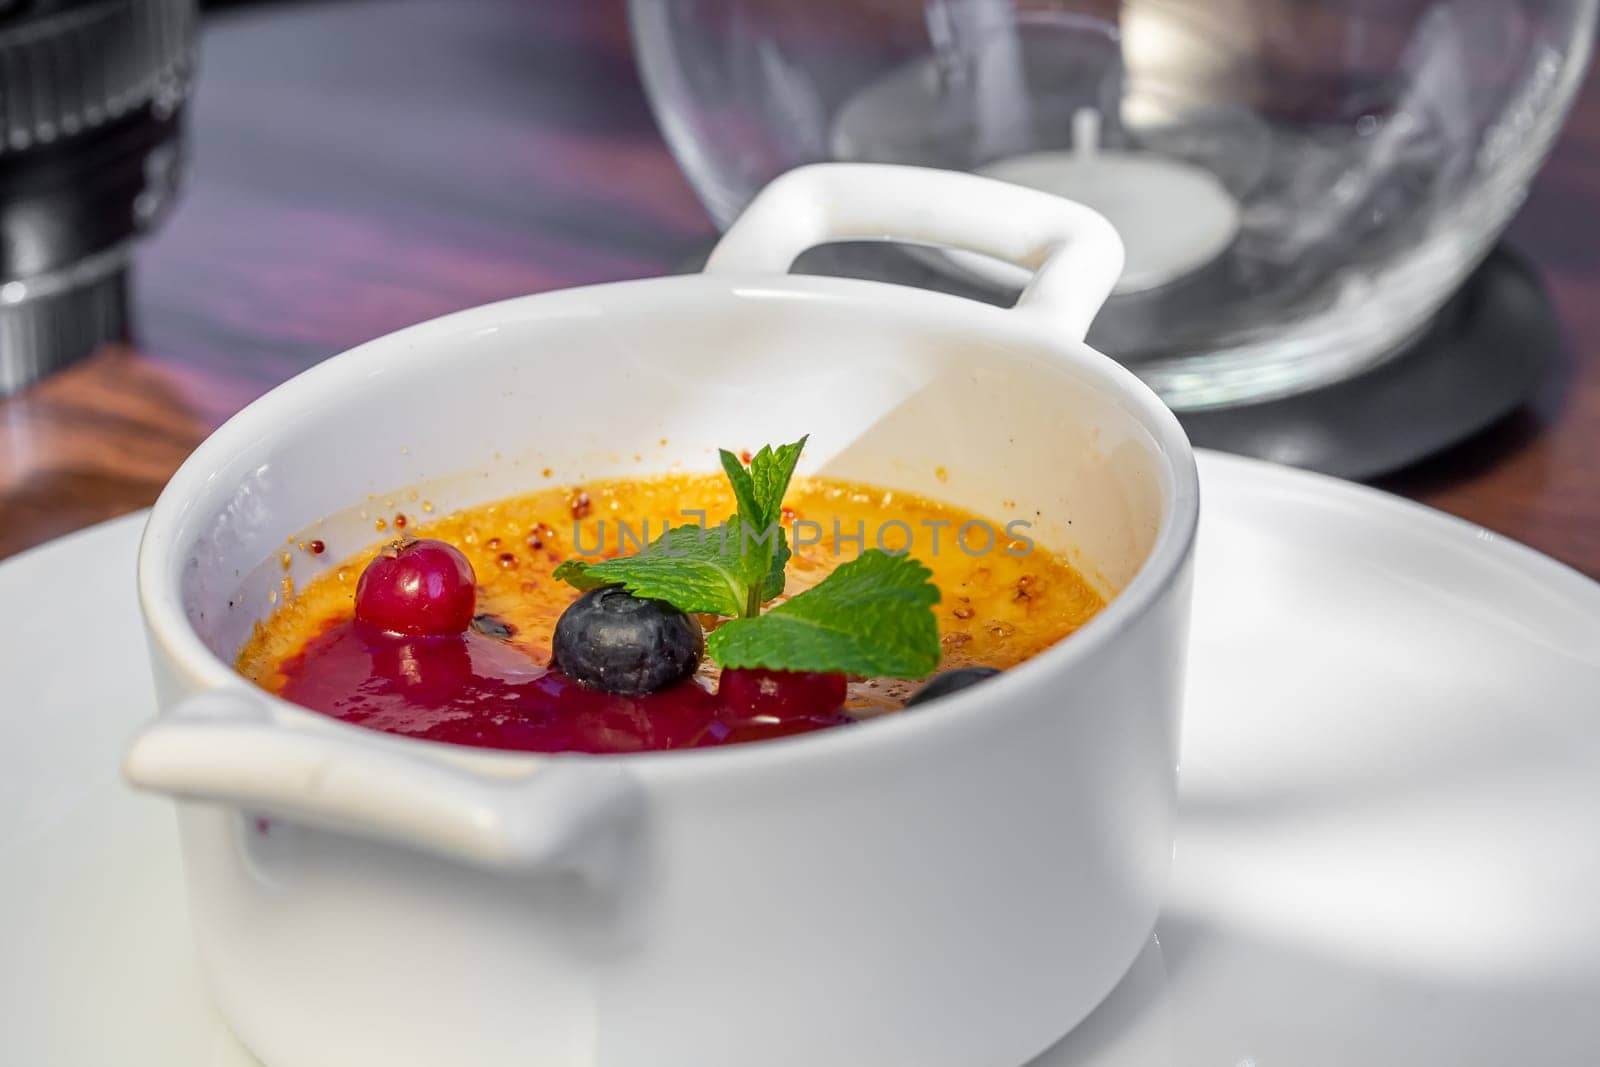 Dessert creme brulee or Catalan cream with mint leaves and berries by Milanchikov